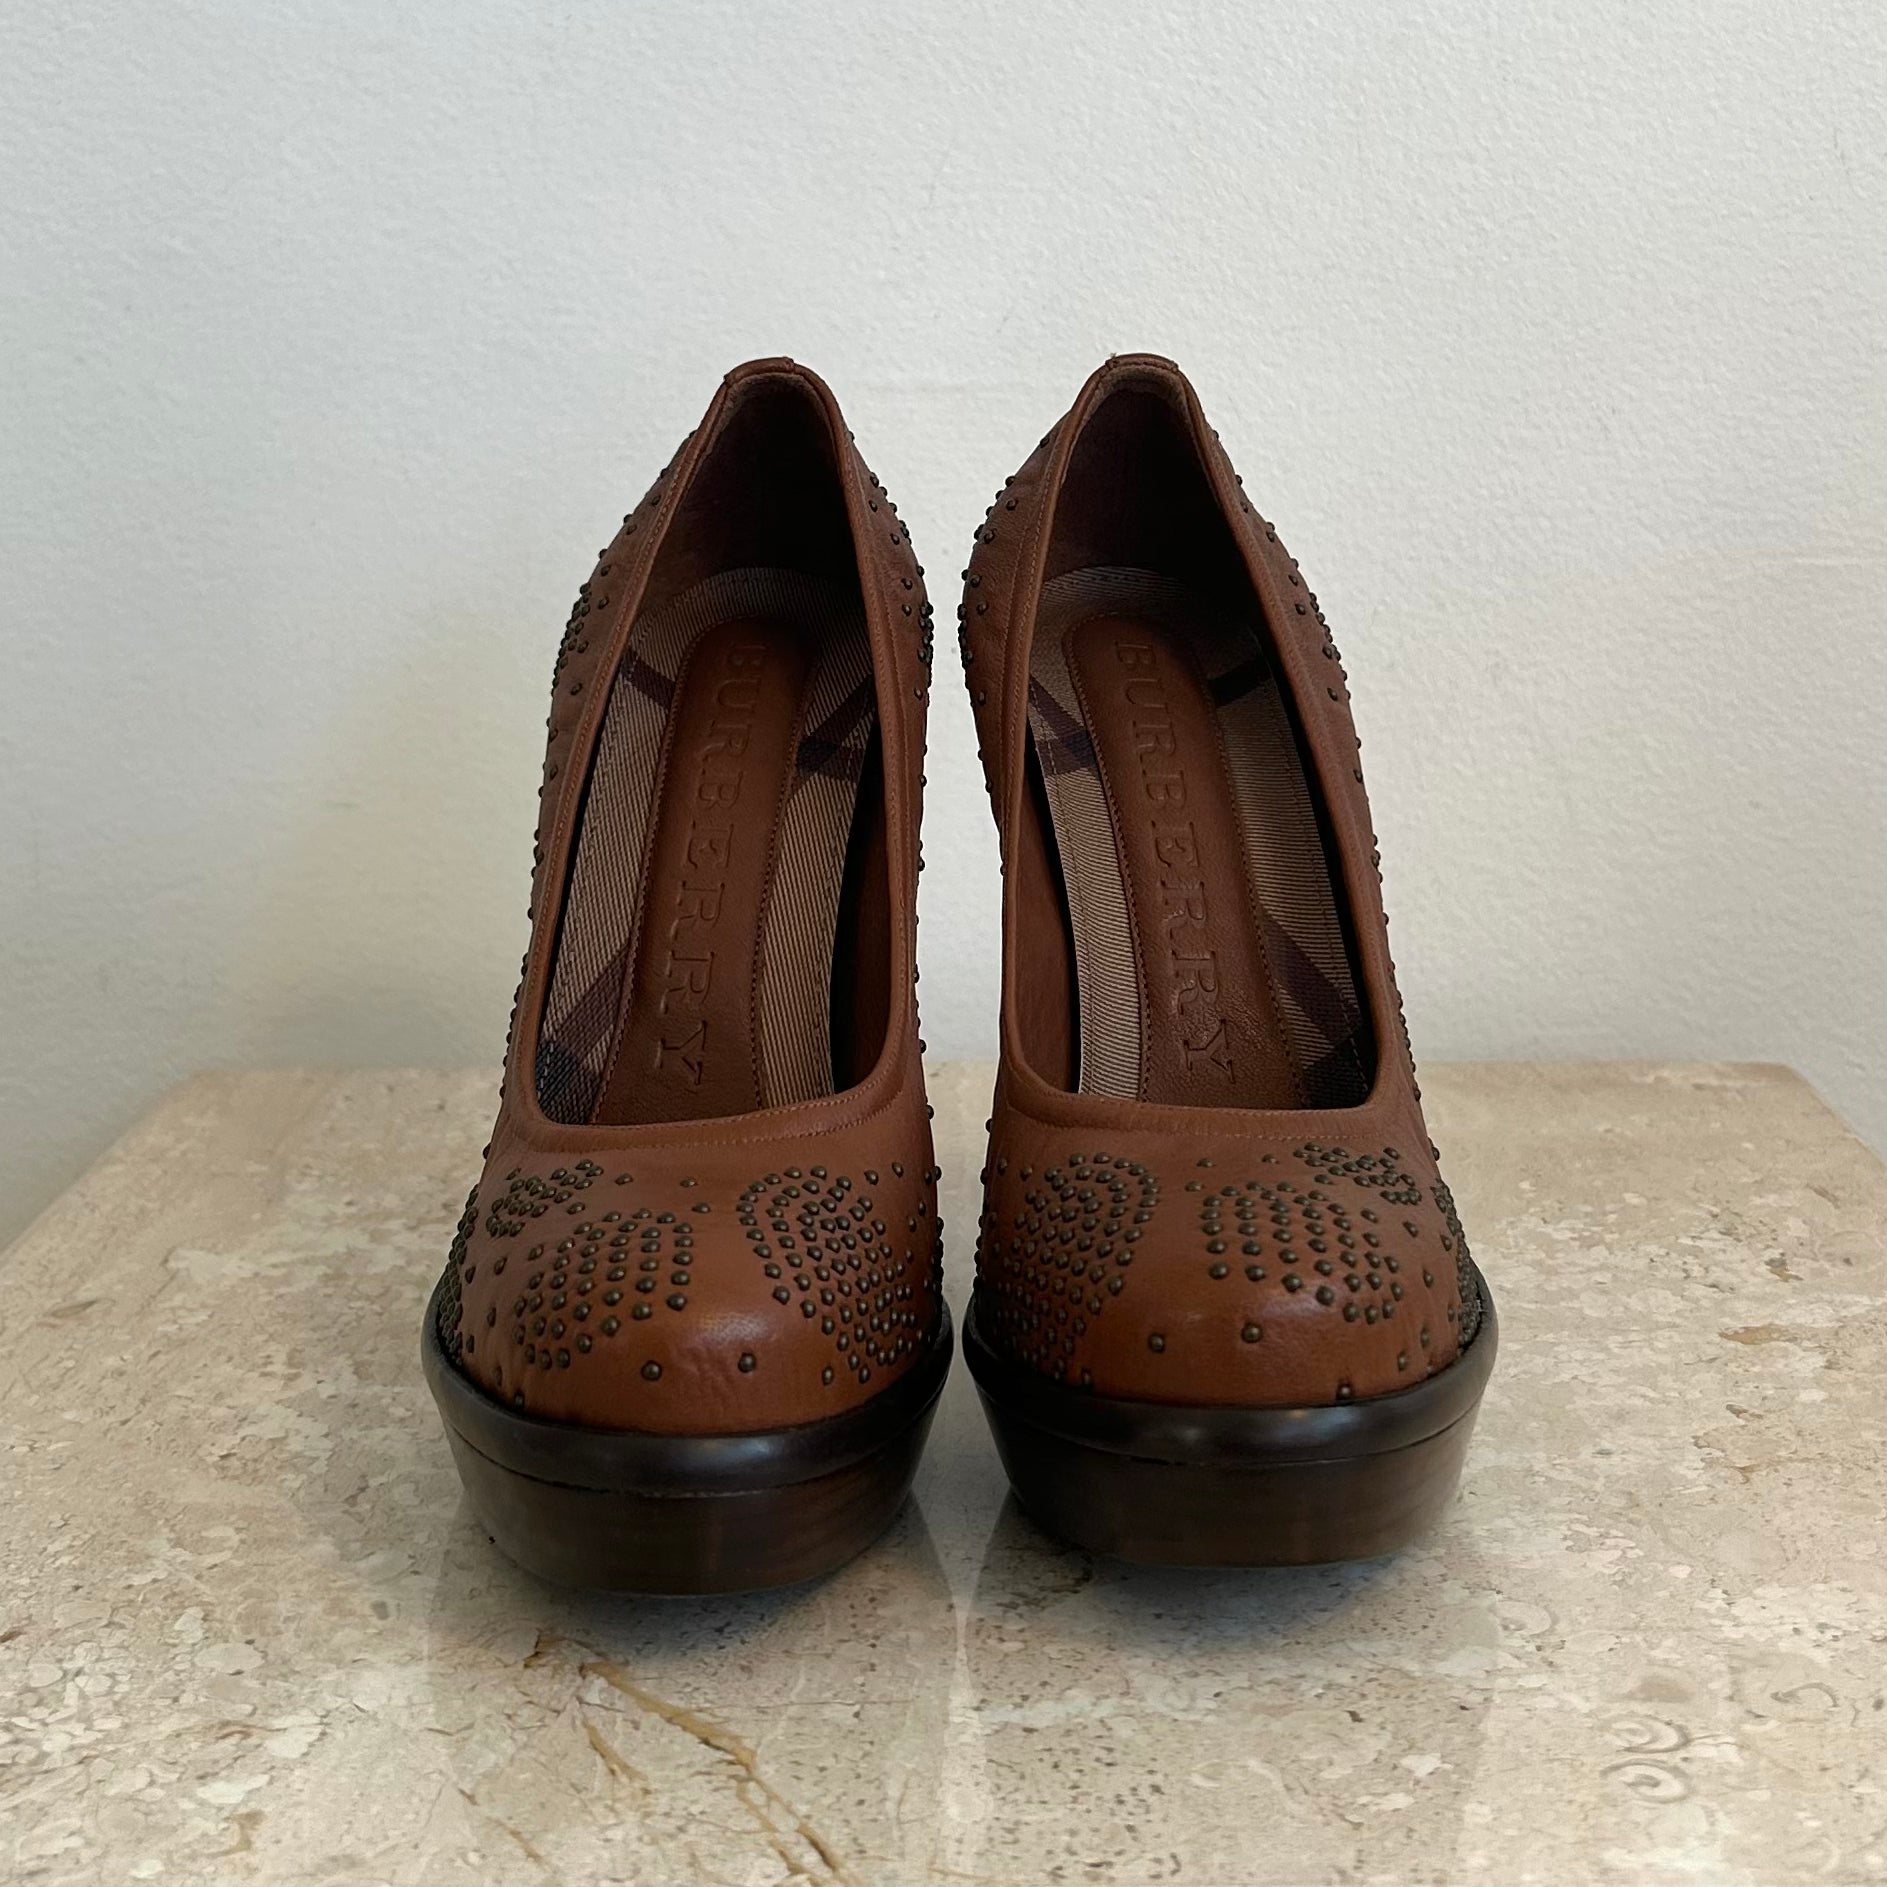 Pre-Owned BURBERRY Brown Leather Studded Platform Heels - Size 37.5